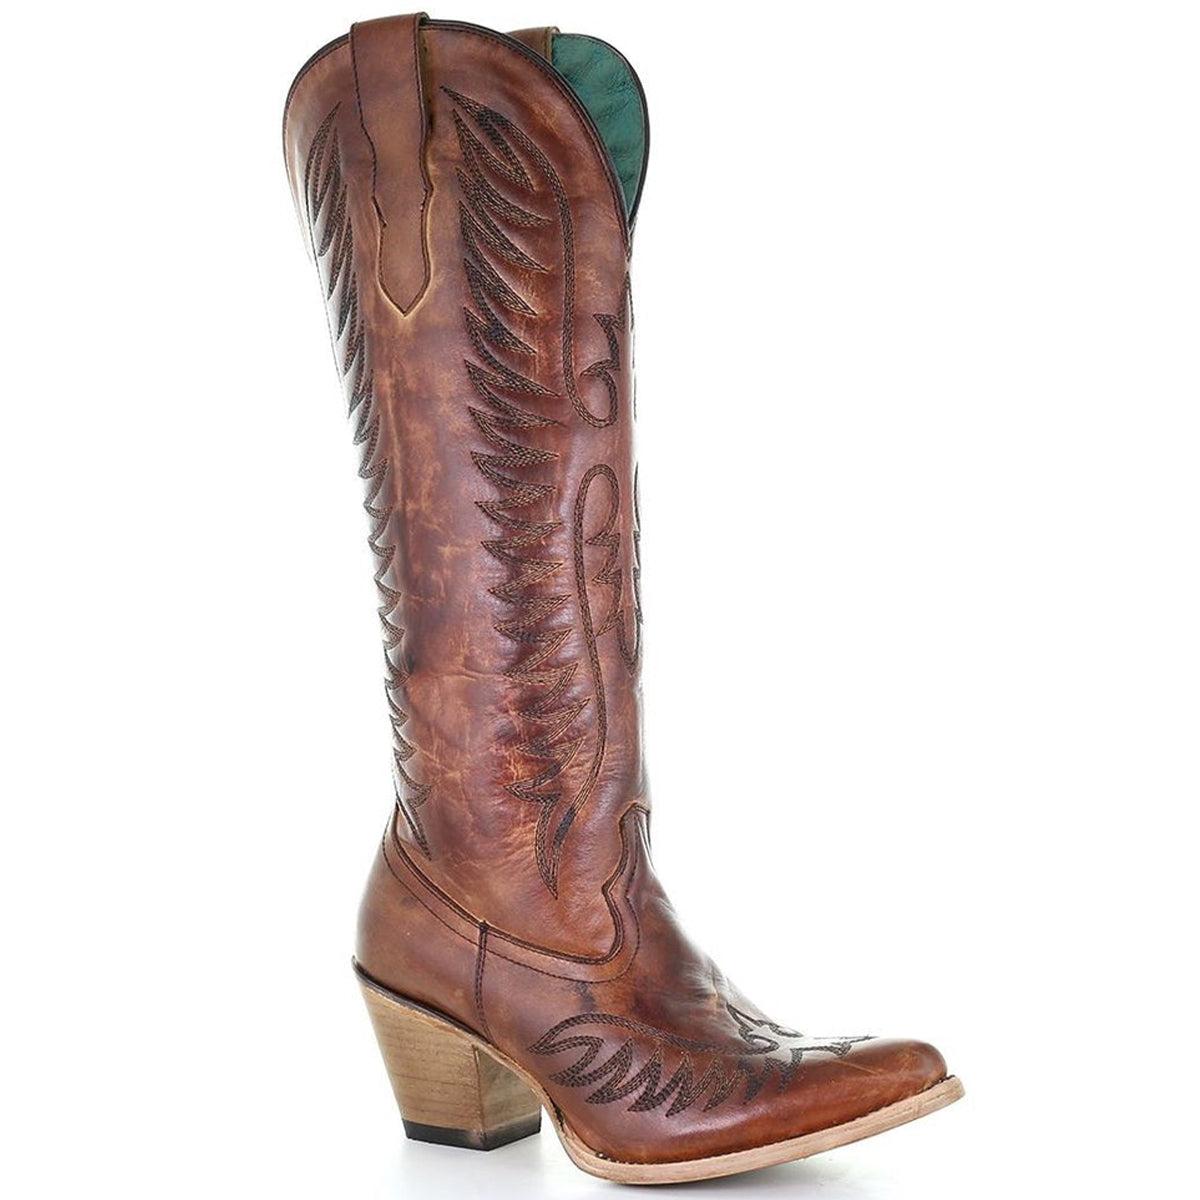 Women's Embroidery Western Corral Tall Boot